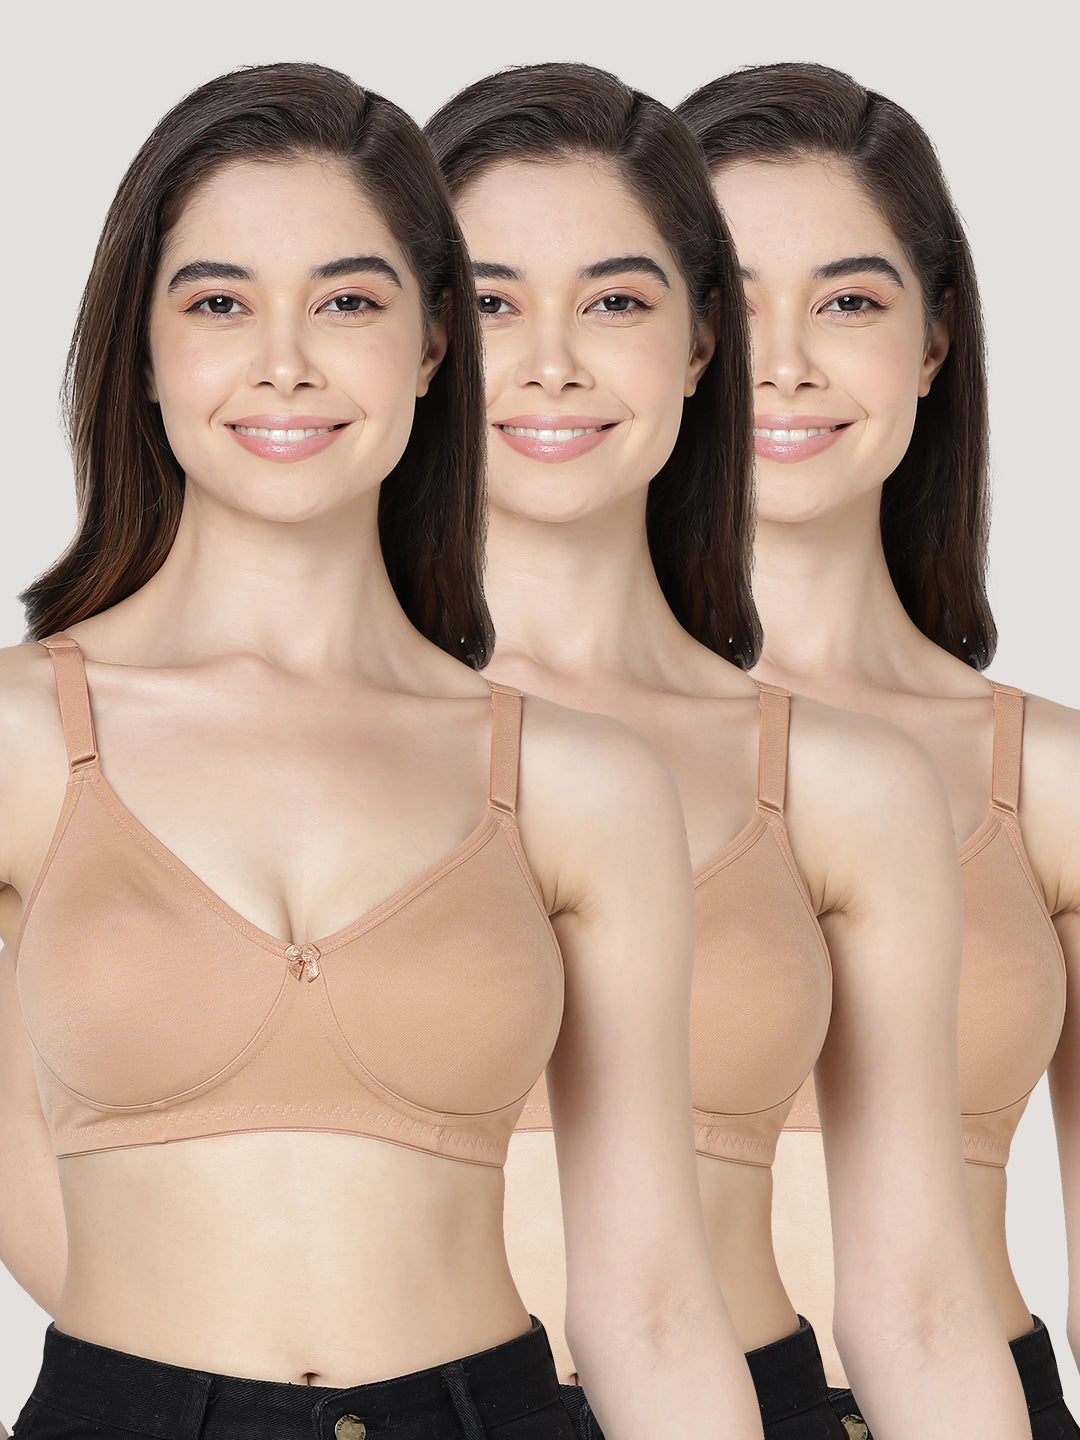 kalyani Evlyn Full Coverage Double Layered Cups Everyday Bra Women Everyday  Non Padded Bra - Buy kalyani Evlyn Full Coverage Double Layered Cups  Everyday Bra Women Everyday Non Padded Bra Online at